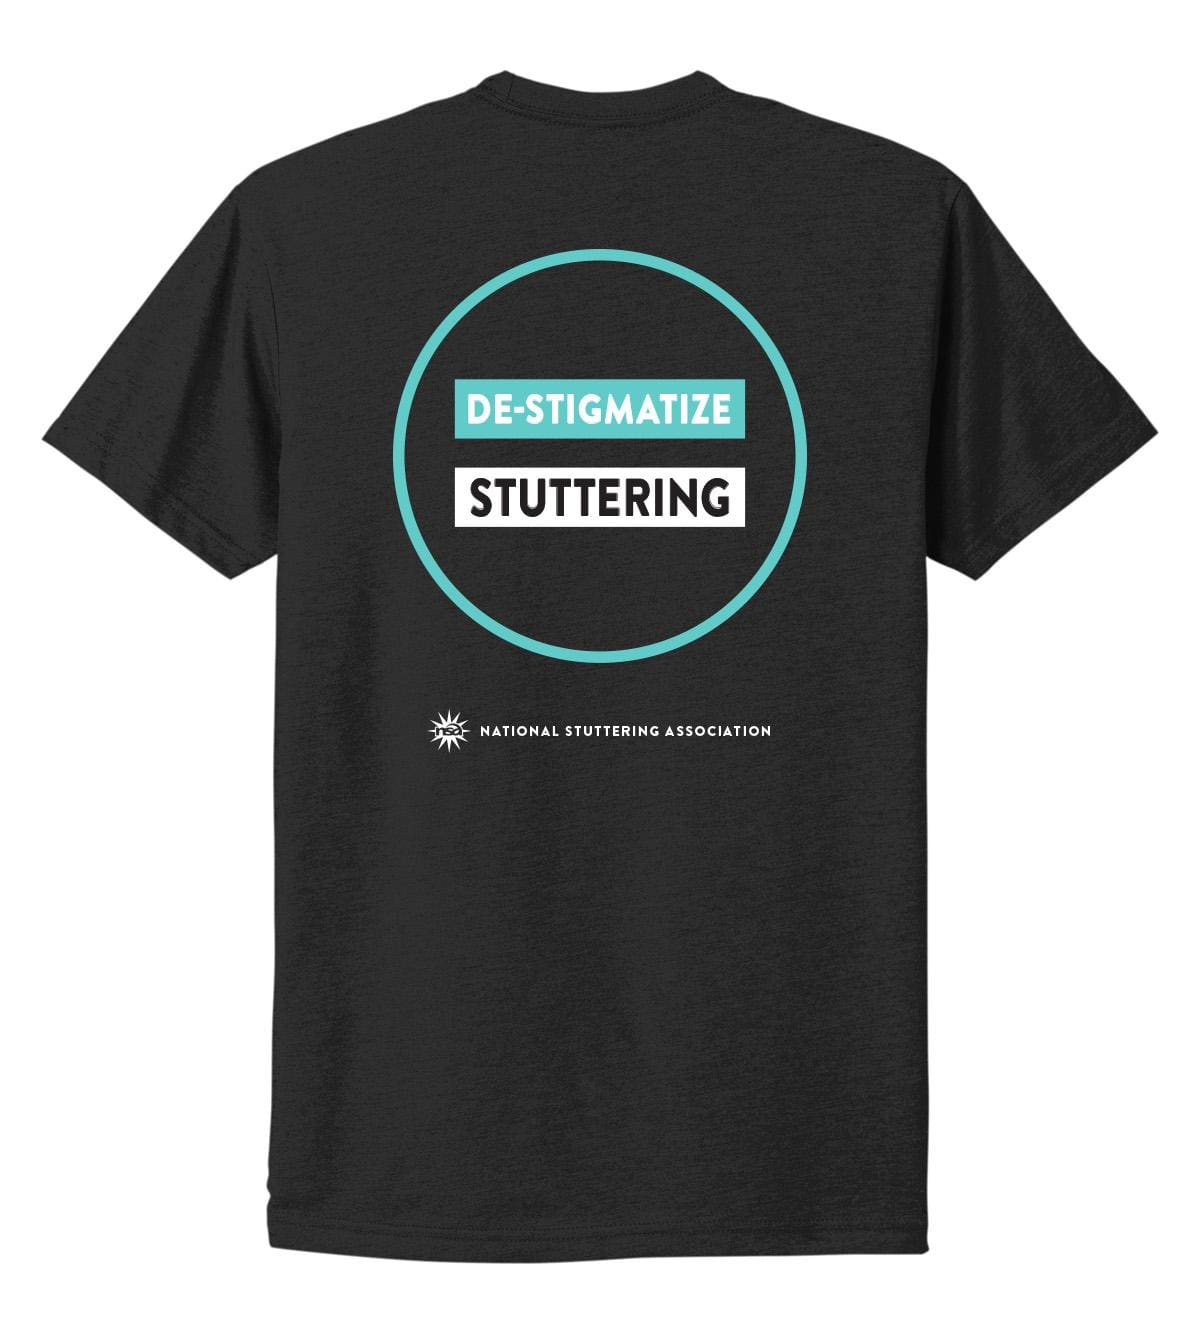 De-Stigmatize Stuttering Tee with a teal circle and white text inside that reads "de-stigmatize stuttering". the logo of the national stuttering association is at the bottom.